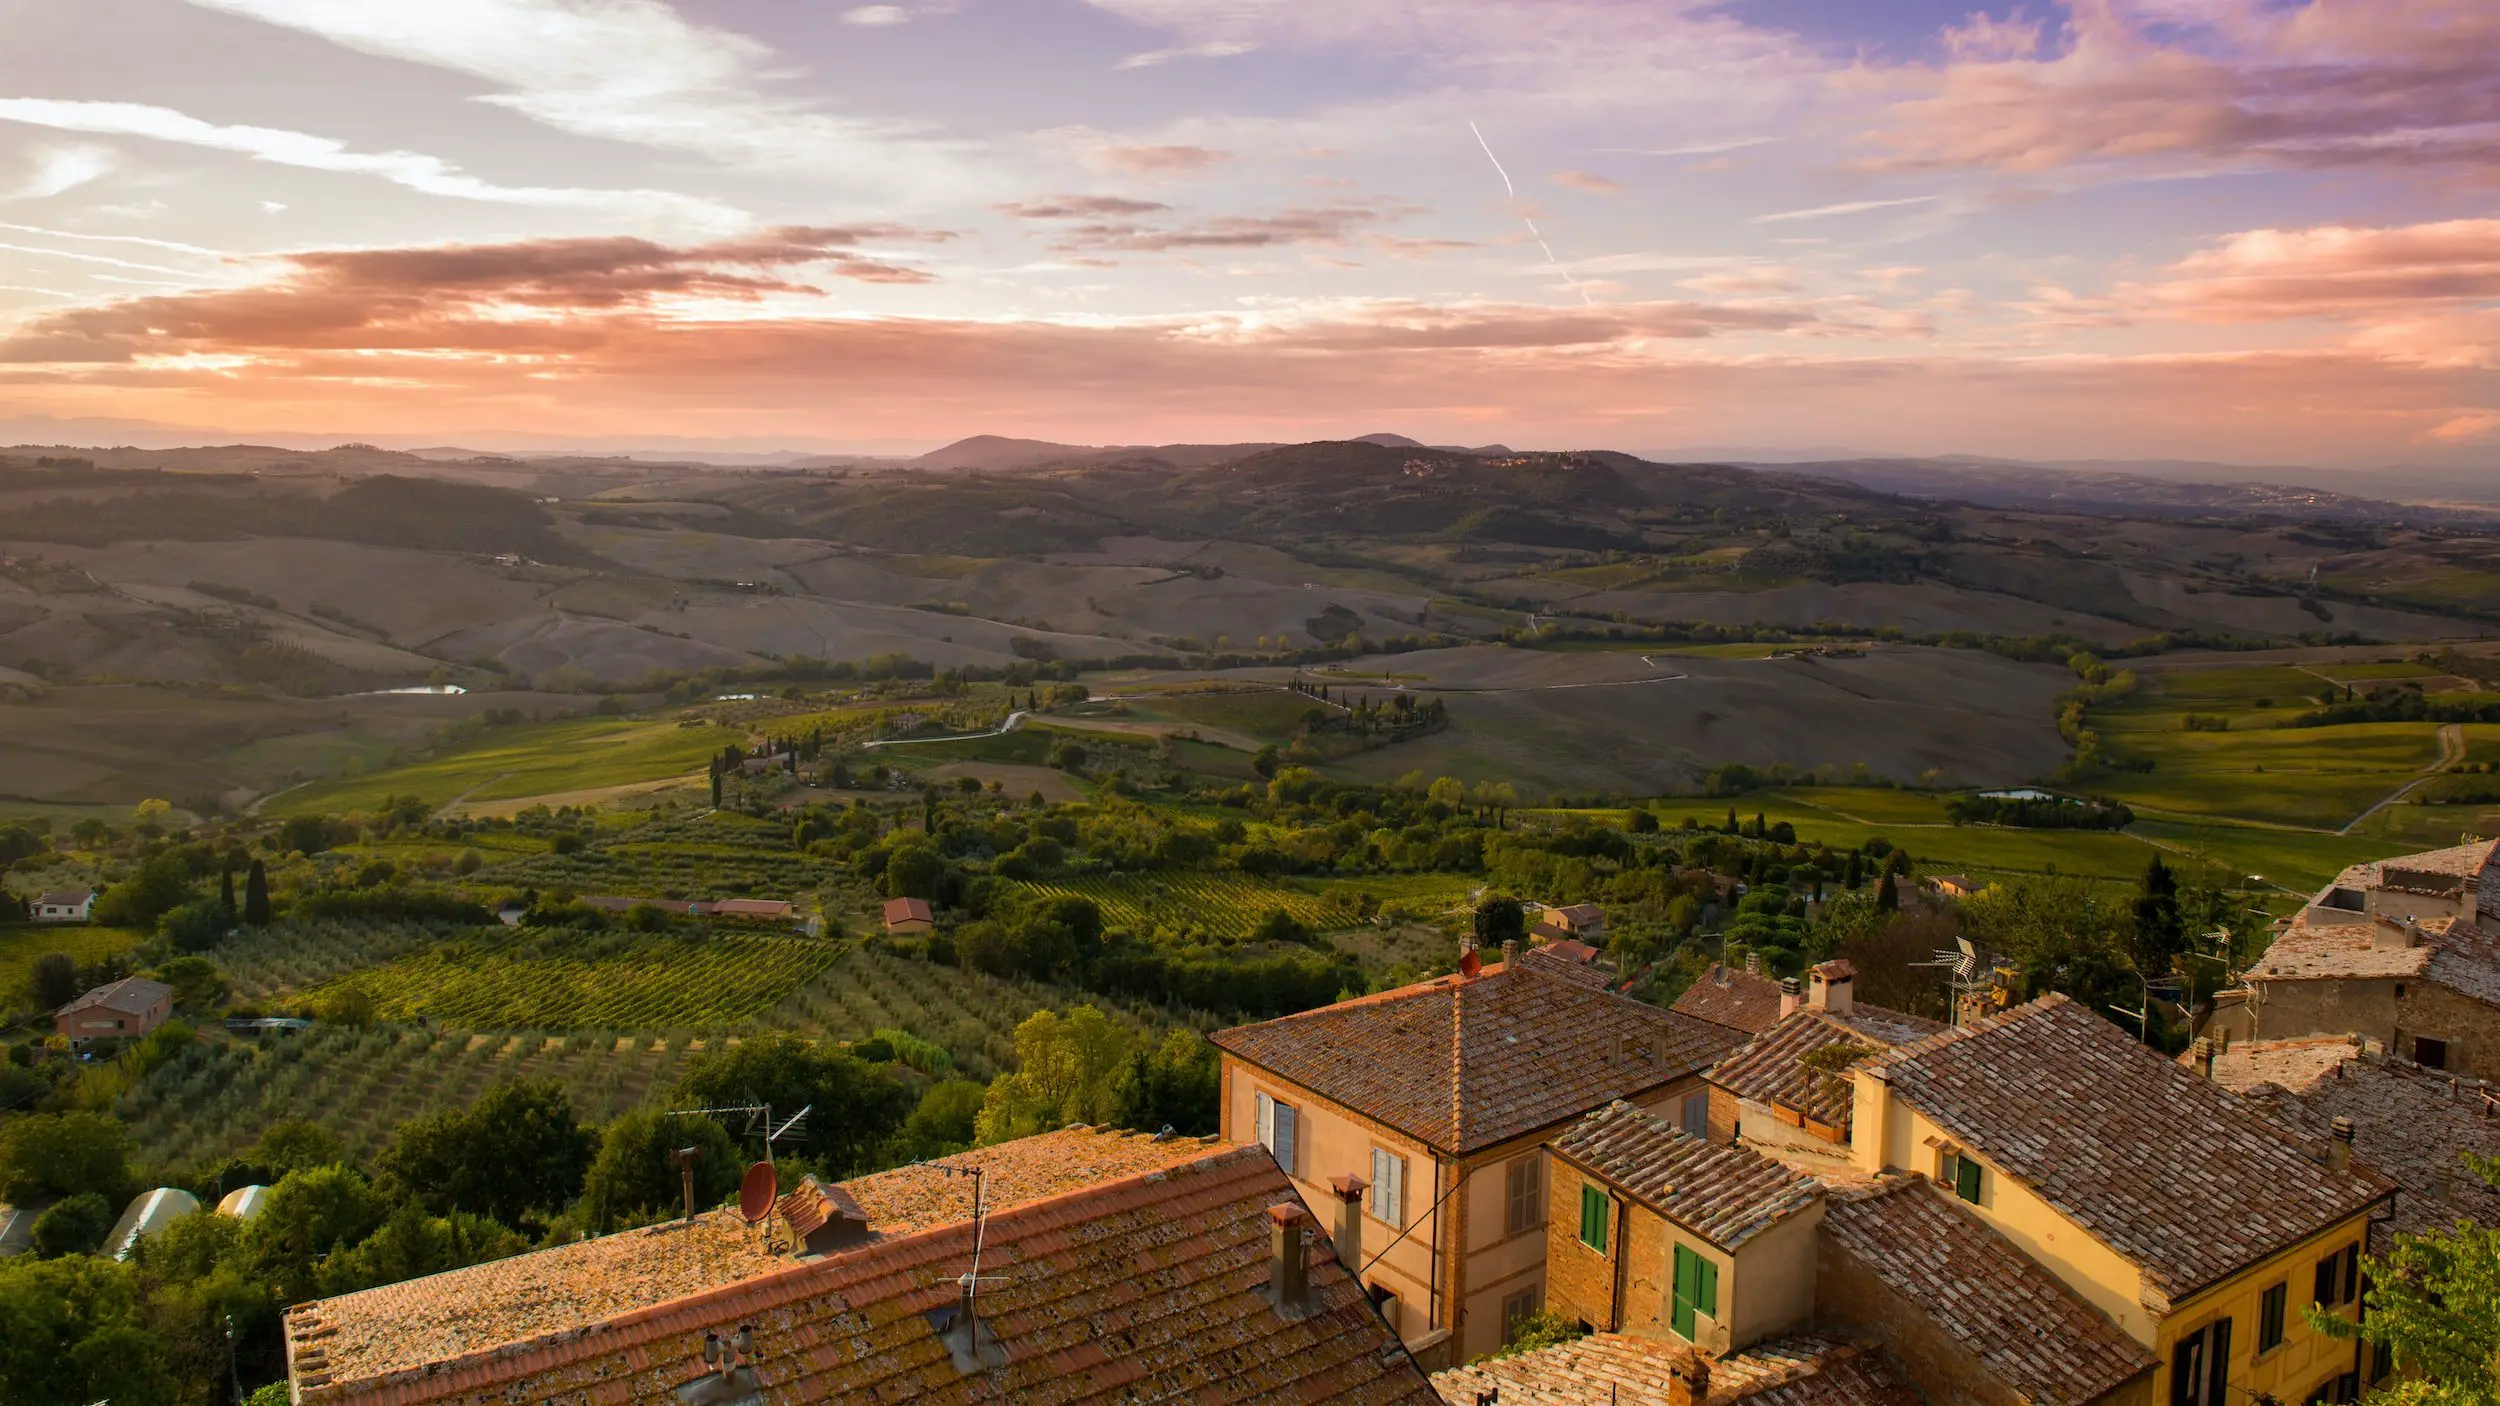 how beginners can learn about wine - tuscany